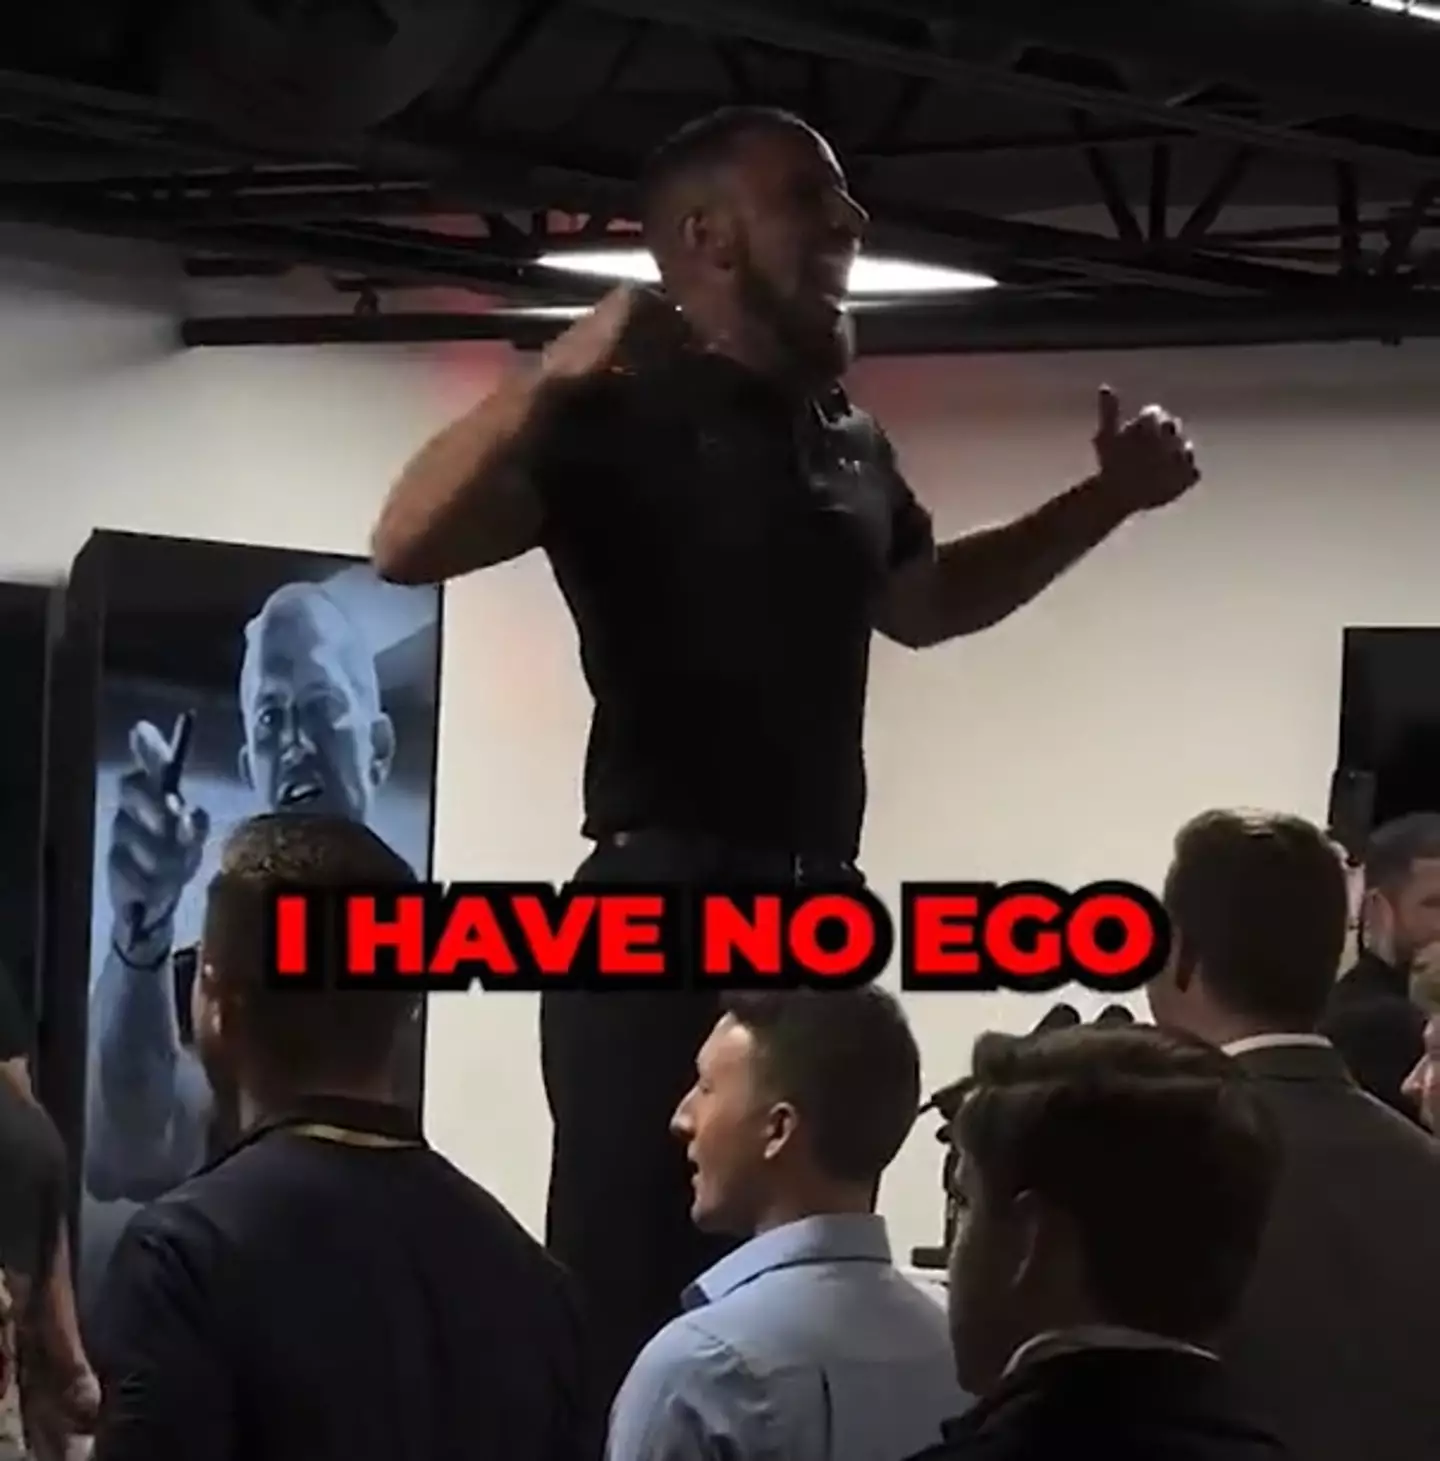 Nothing says 'I have no ego' like standing above everyone else shouting it loudly so everyone can hear and repeat after you.